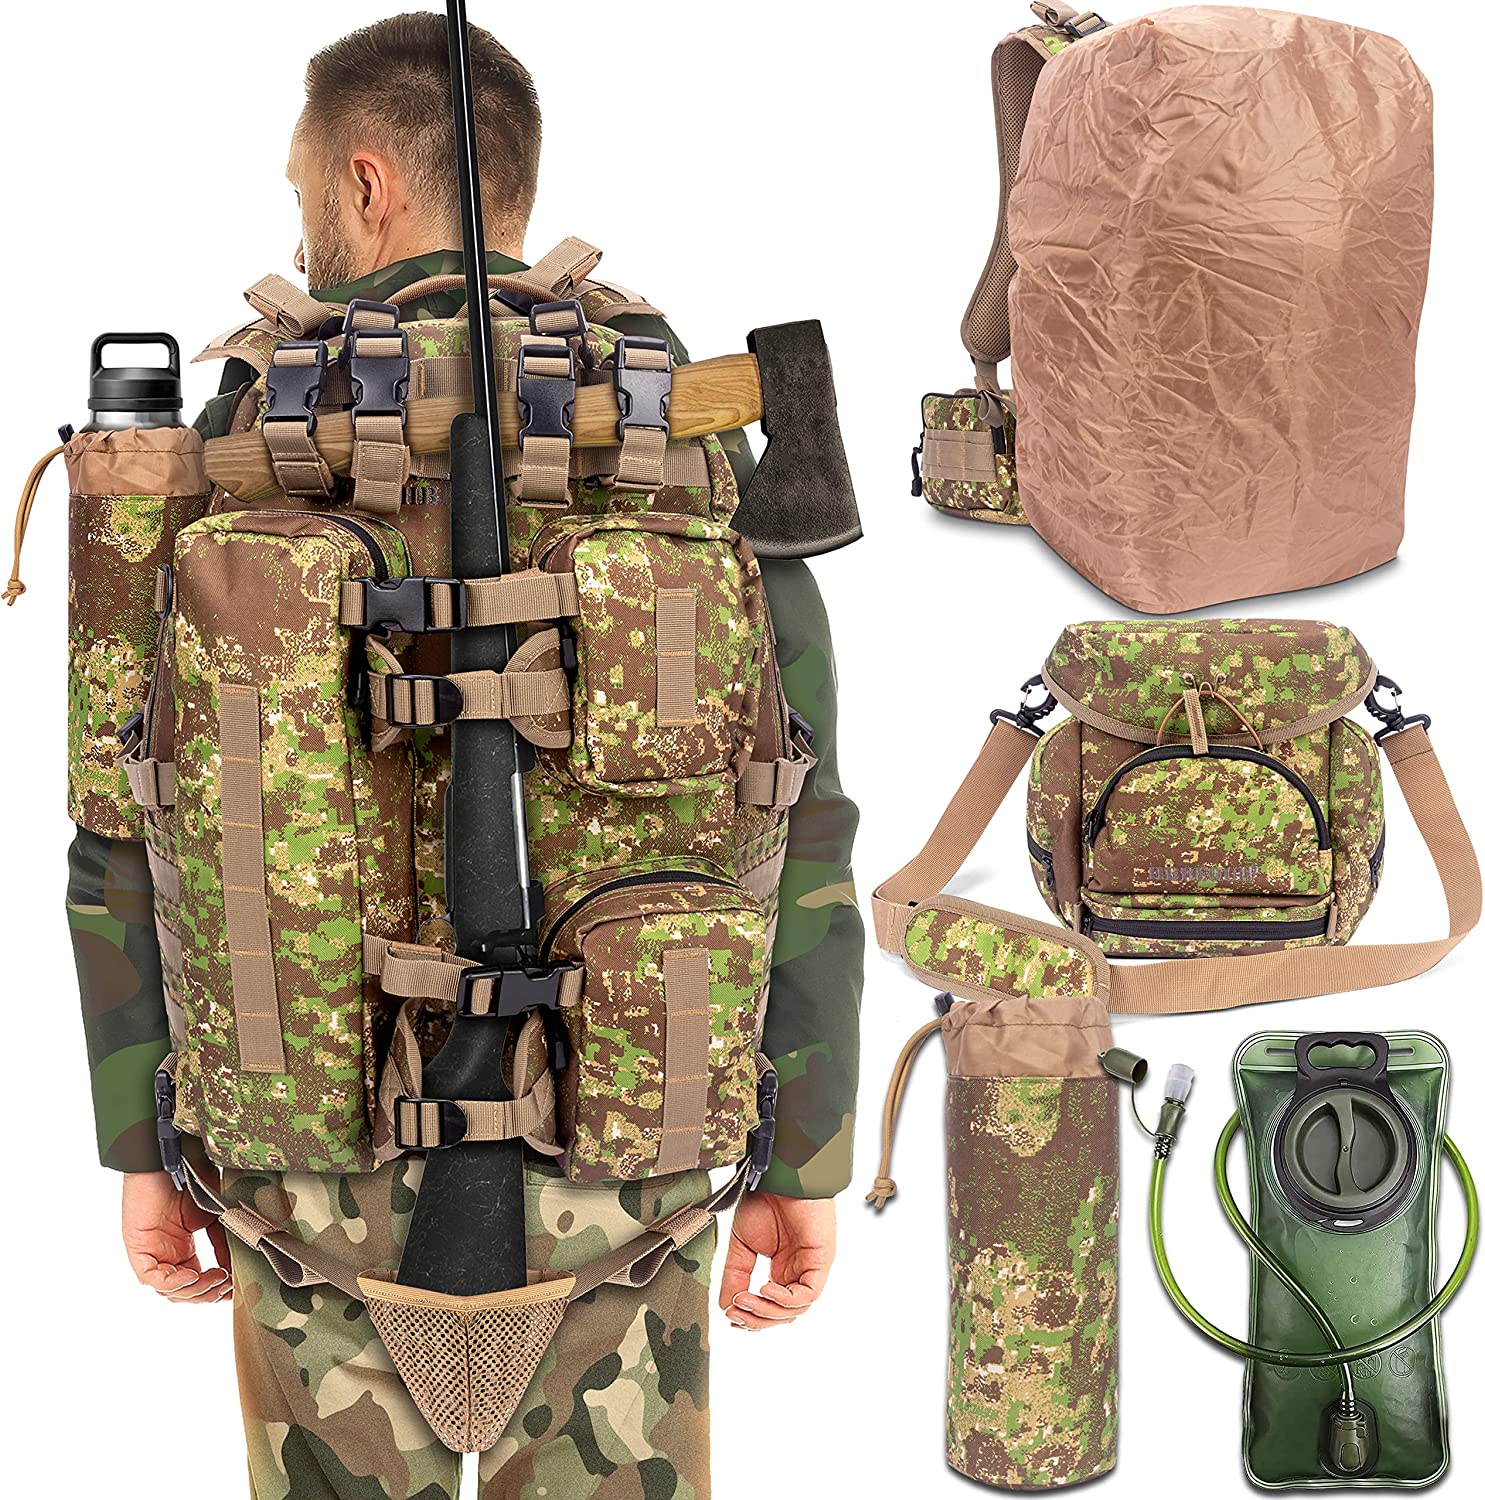 HBREQUIP Large Hunting Backpack for Bow & Rifle Hunting Gear and Equipment & Camo Backpack for Hiking & Outdoor Activities w/Weatherproof Cover,...